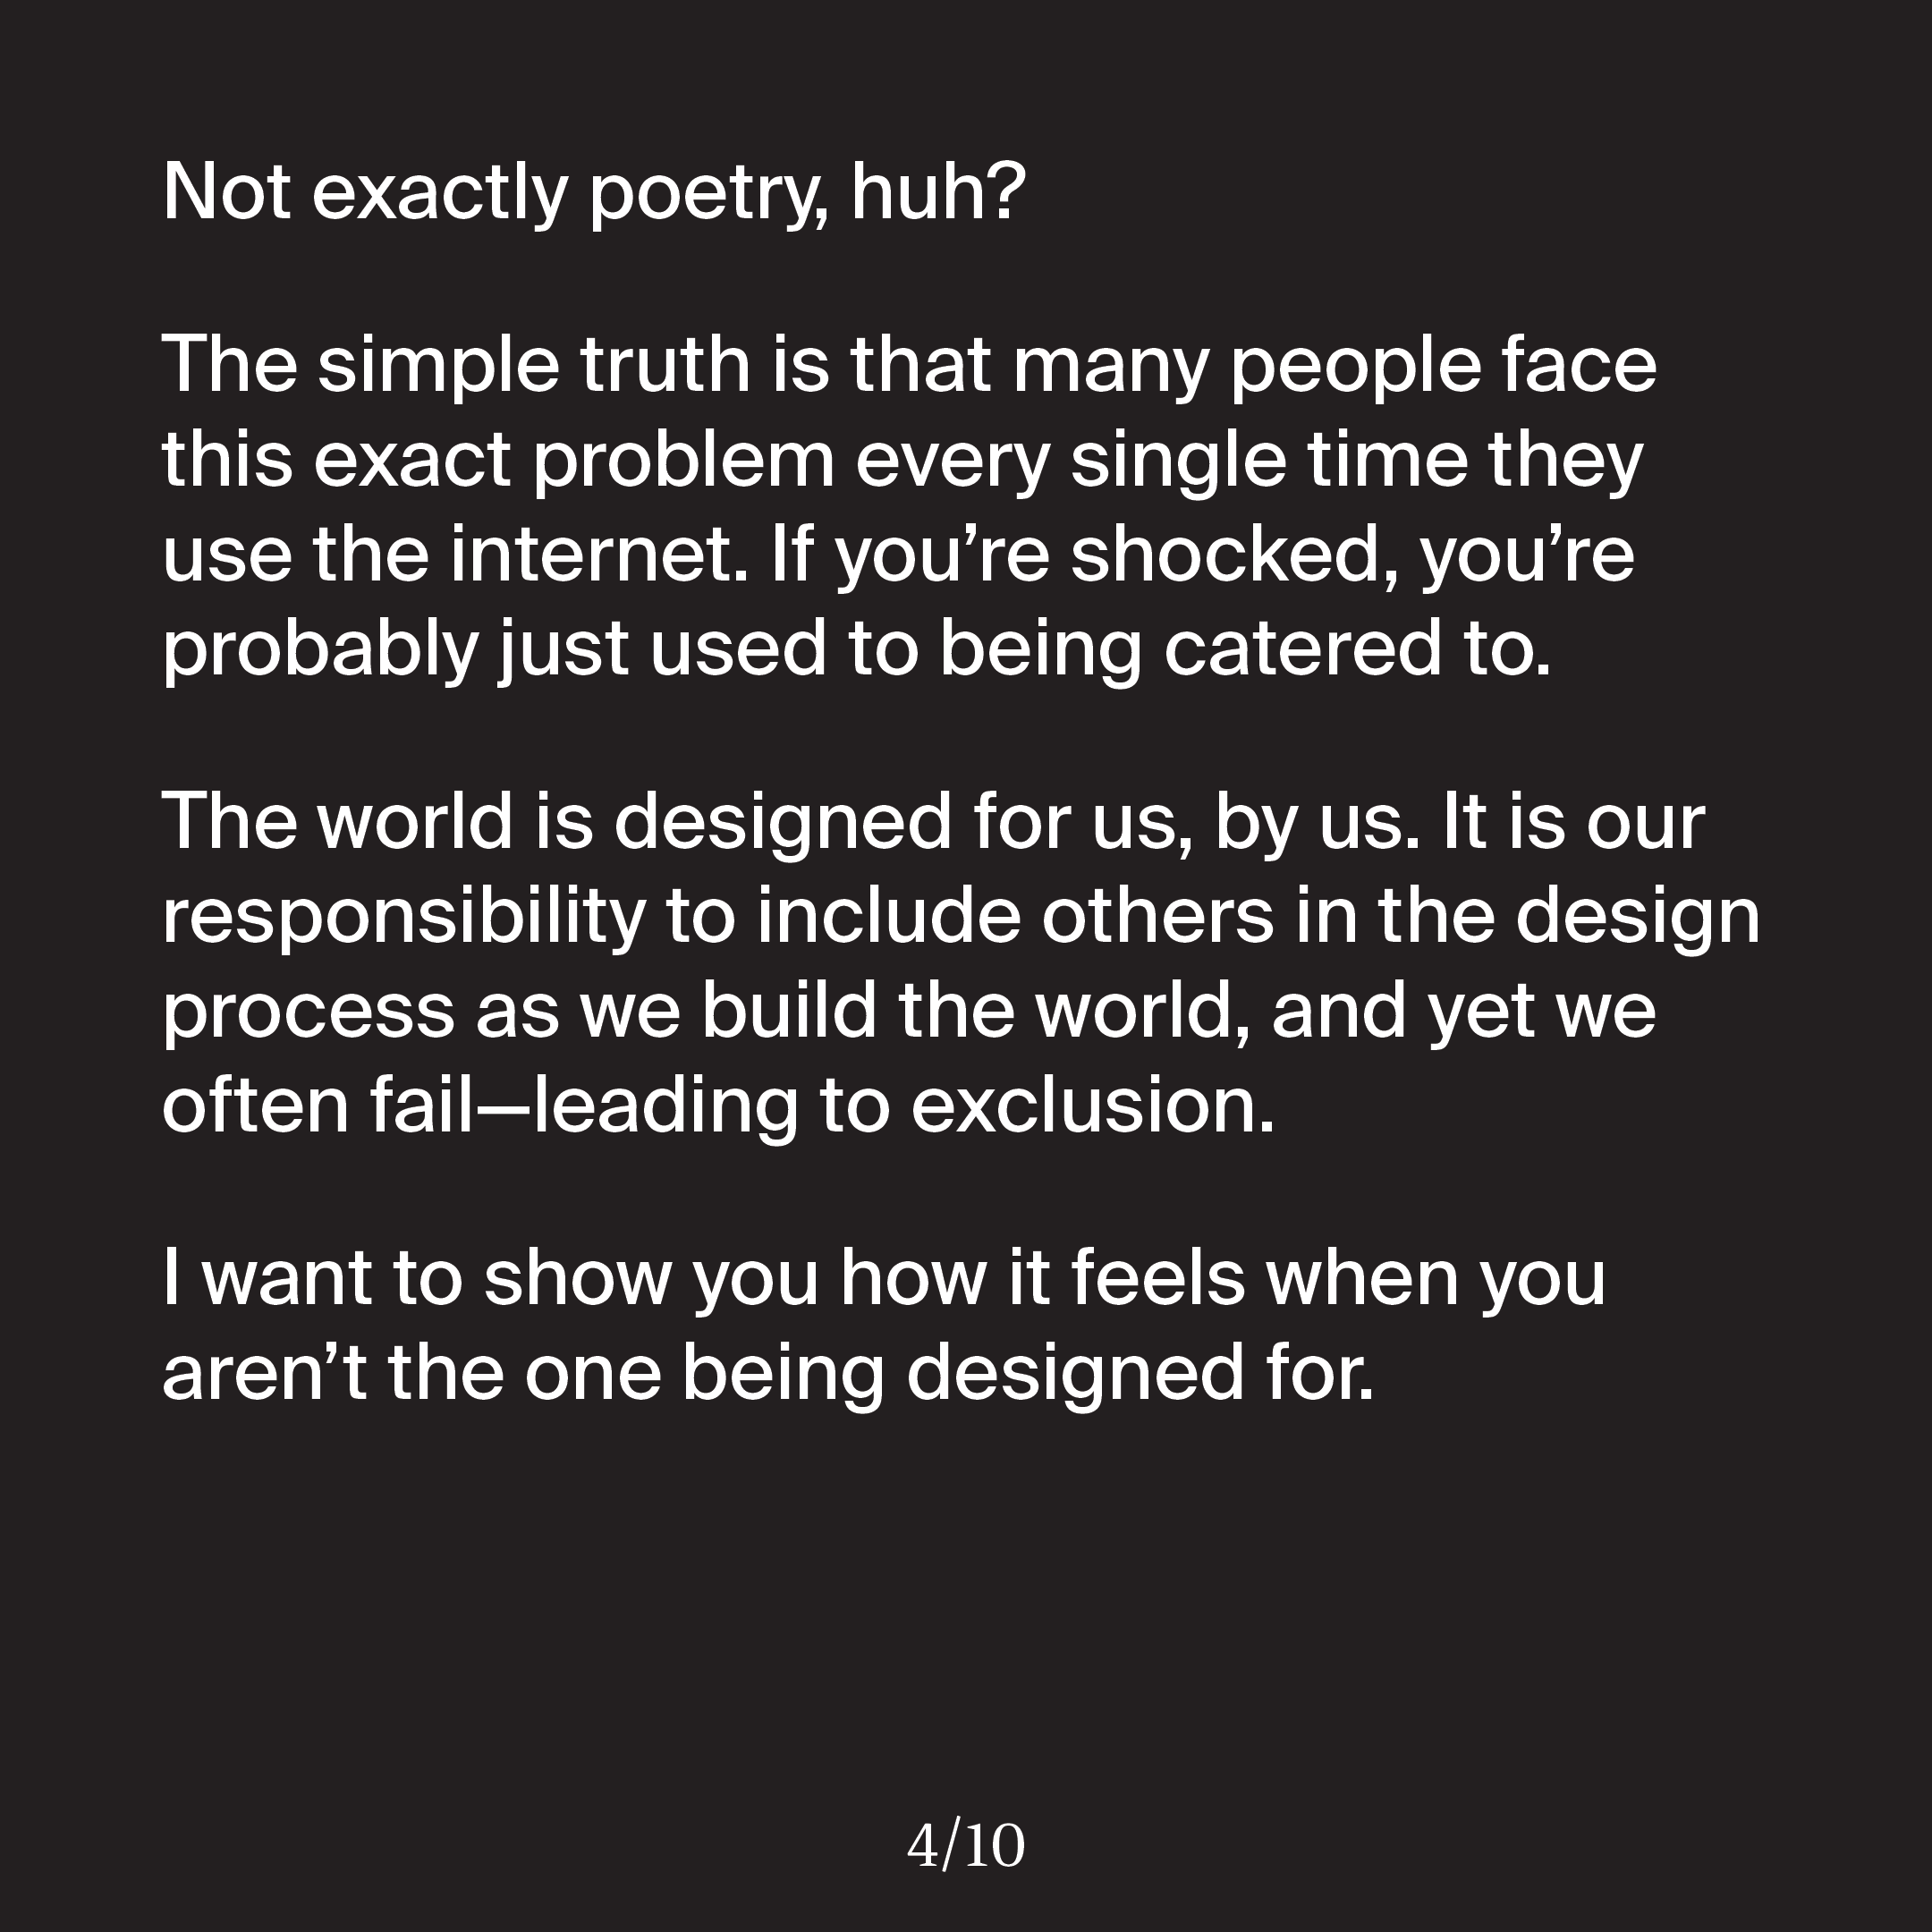 'Not exactly poetry, huh? The simple truth is that many people face this exact problem every single time they use the internet. If you’re shocked, you’re probably just used to being catered to. The world is designed for us, by us. It is our responsibility to include others in the design process as we build the world, and yet we often fail—leading to exclusion. I want to show you how it feels when you aren’t the one being designed for.'